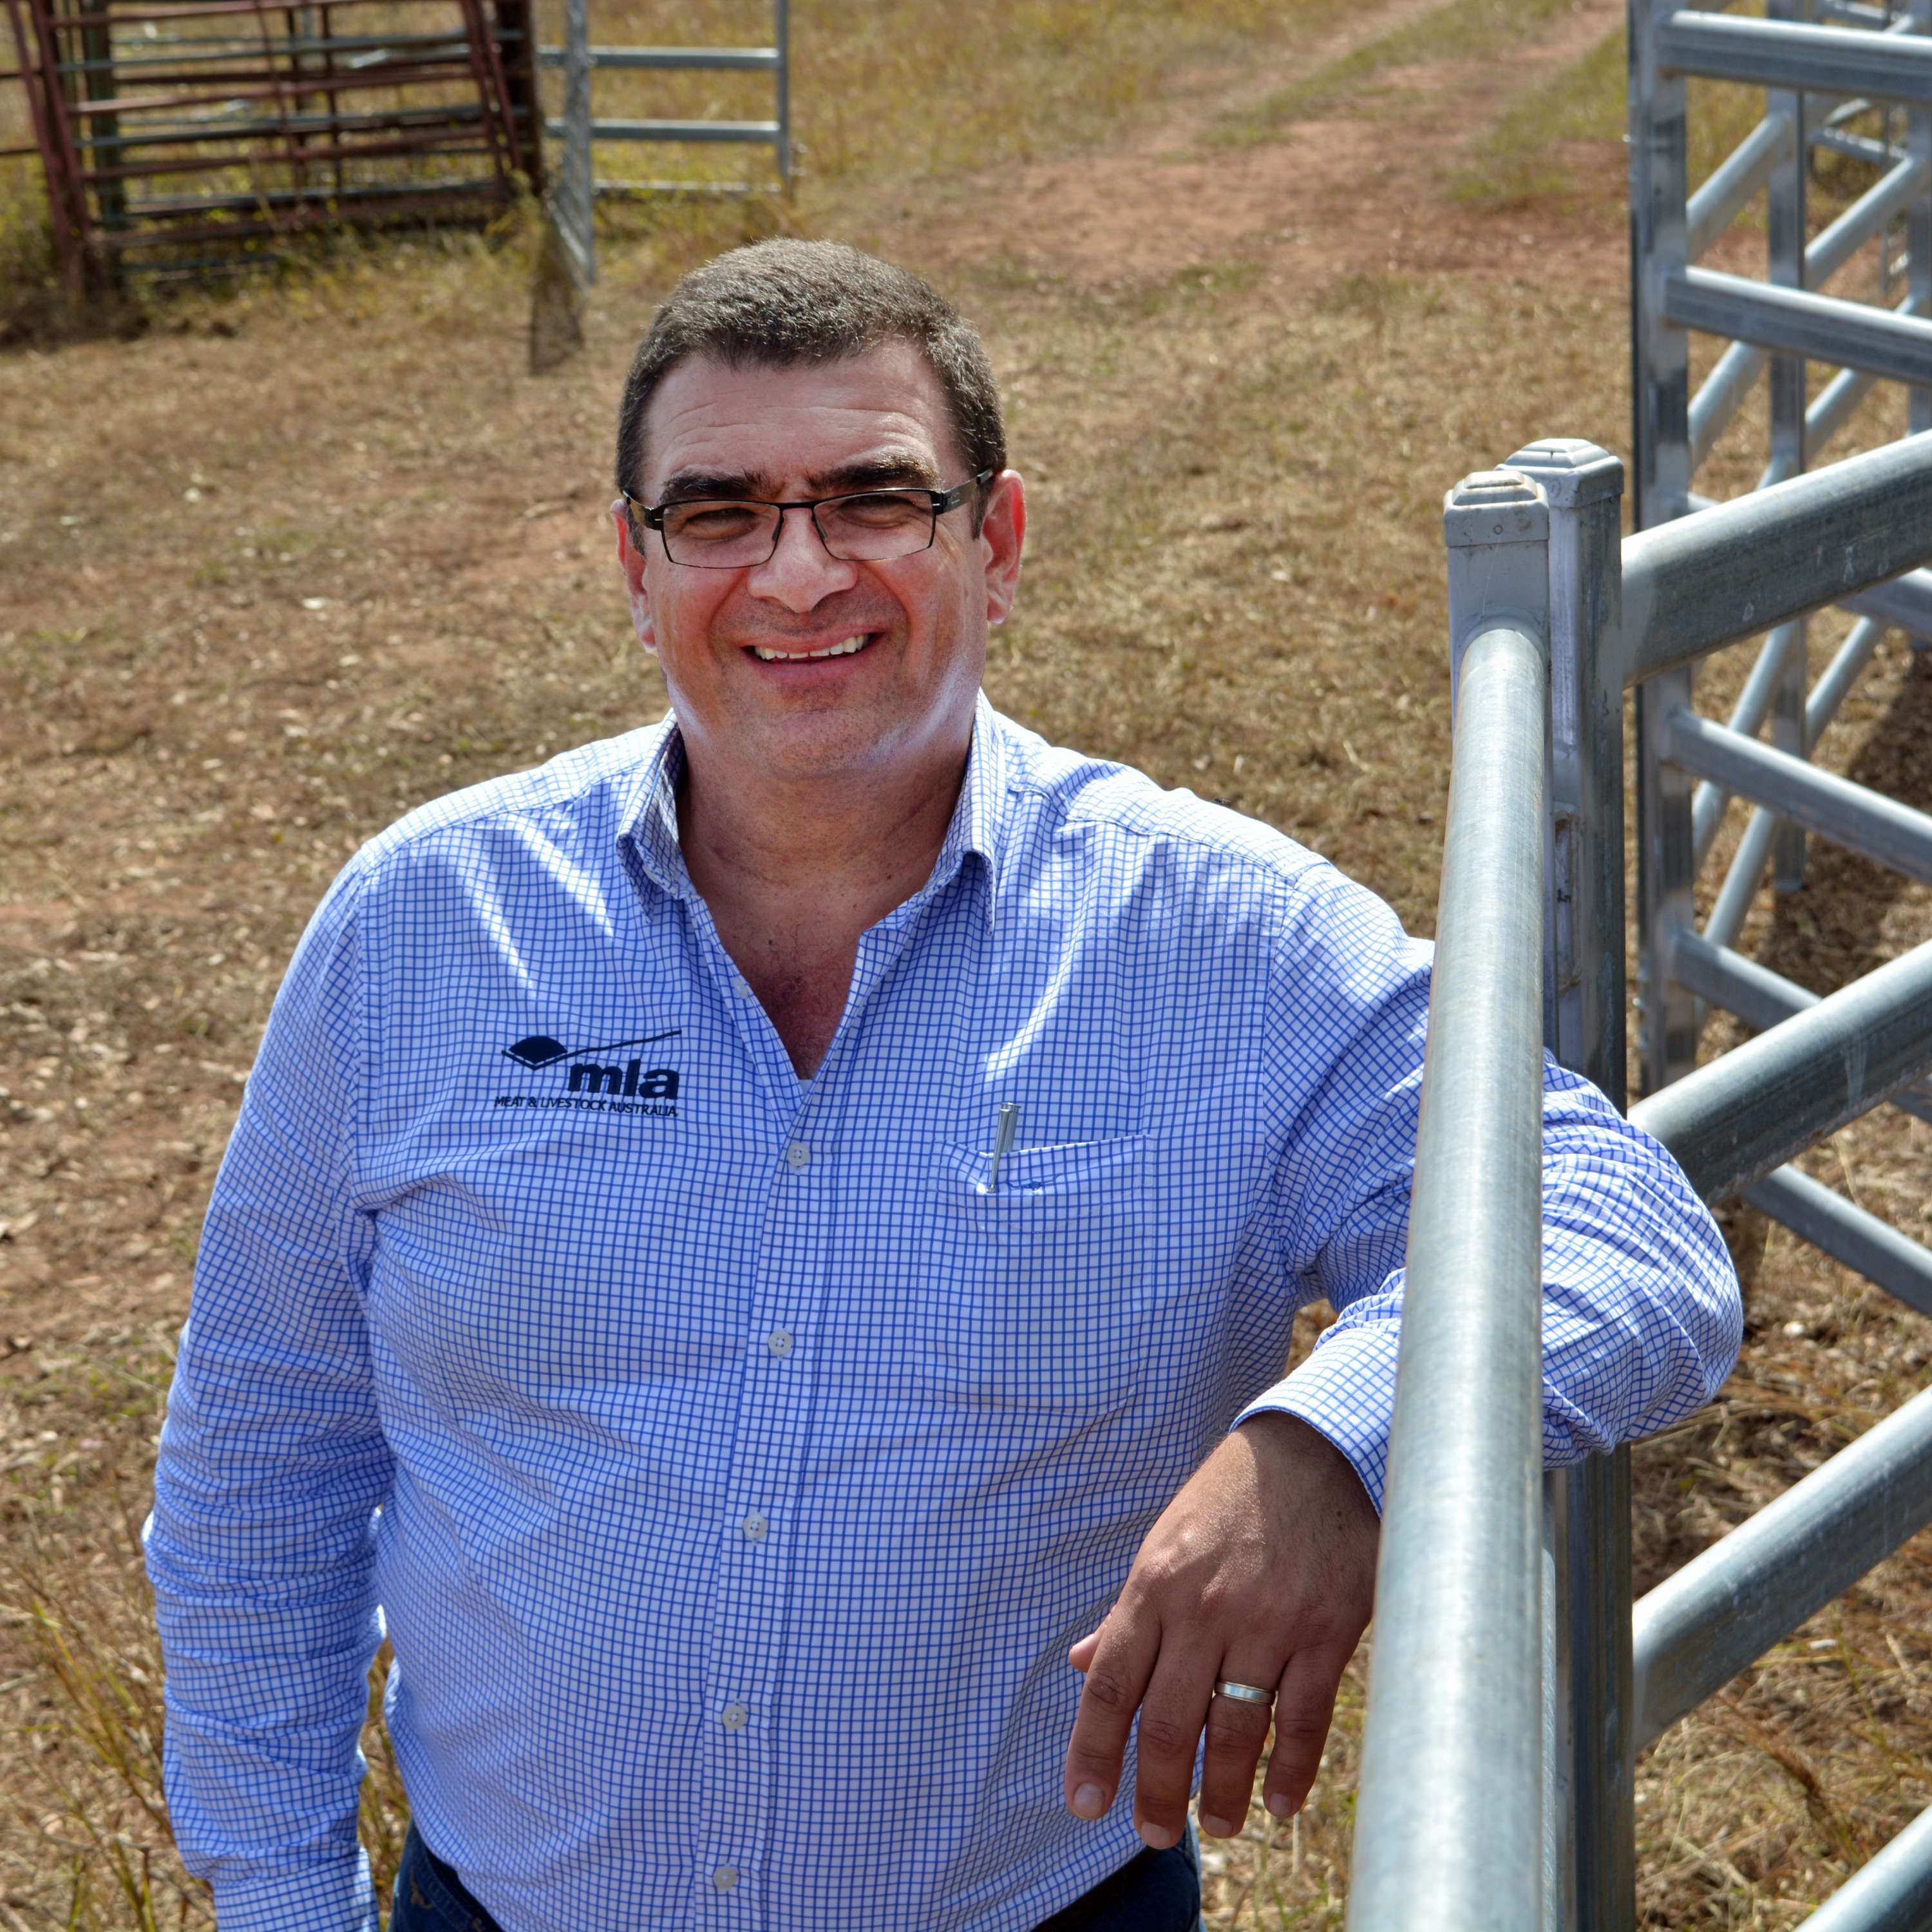 Cattle, Consumers, and Carbon Neutral goals with Jason Strong